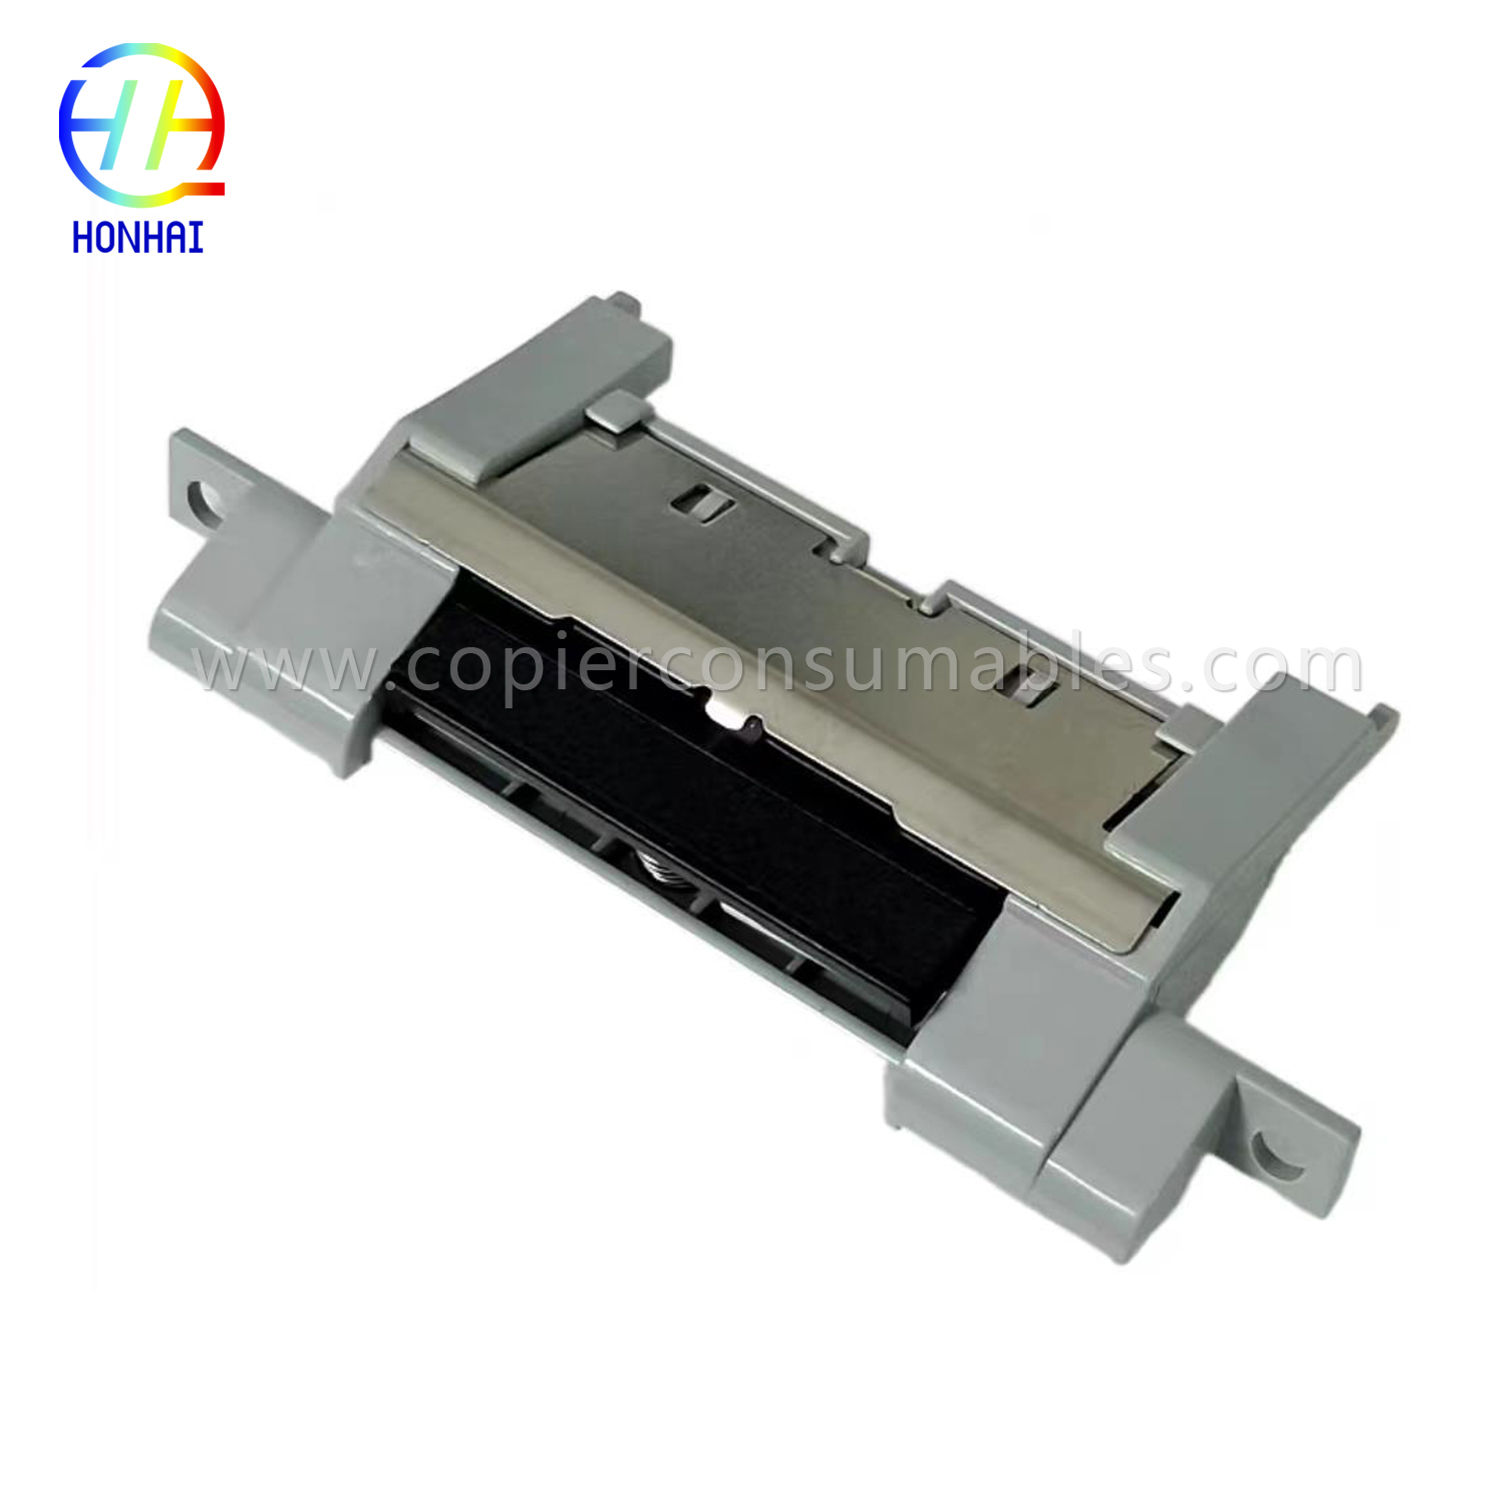 Separation Pad Tray 2 for HP Laserjet P2035 P2035n P2055D P2055dn P2055X (RM1-6397-000)